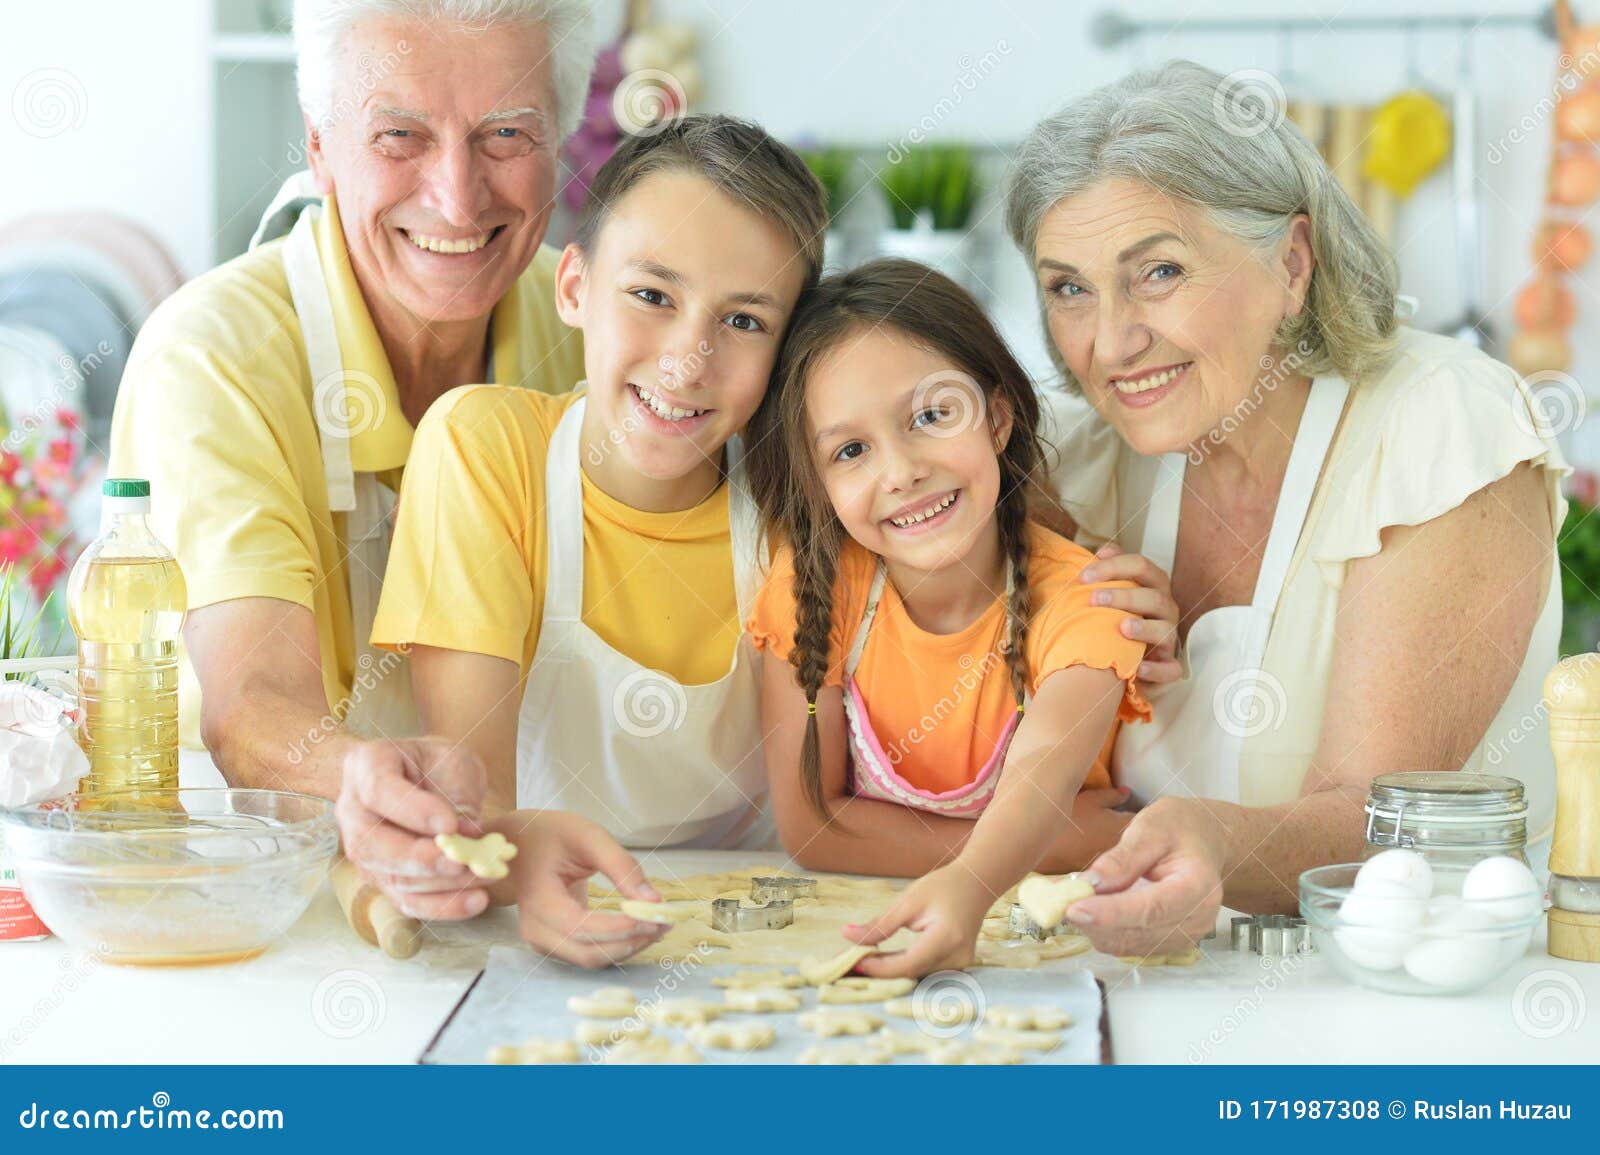 Portrait of Family L Baking Together in the Kitchen Stock Photo - Image